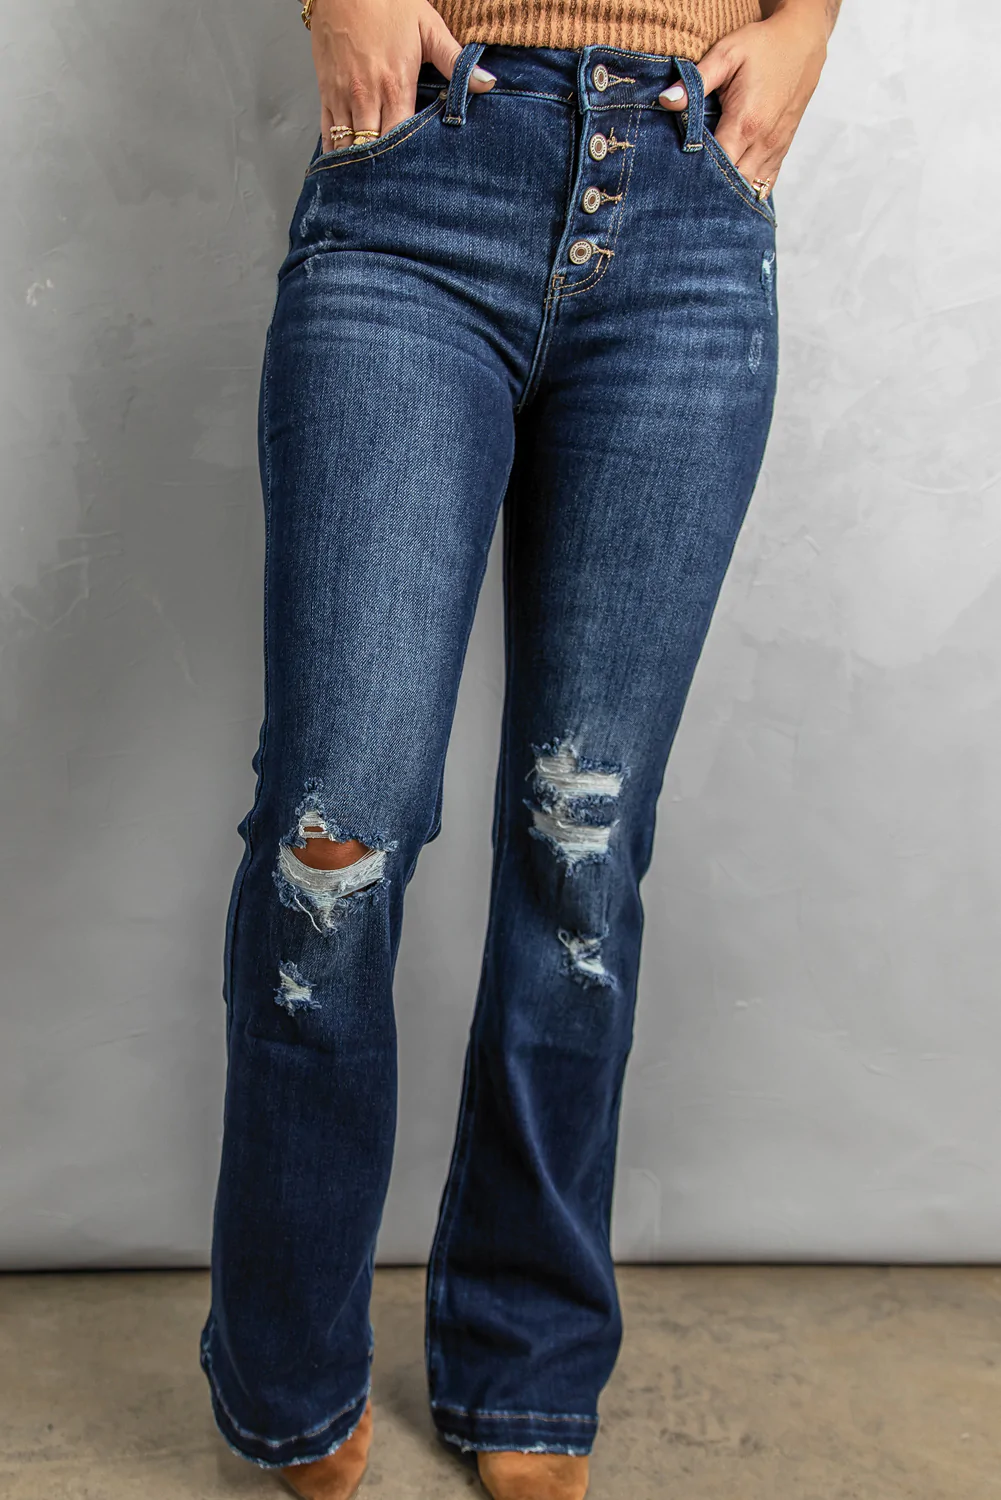 woman wearing a pair of stylish distressed and ripped jeans